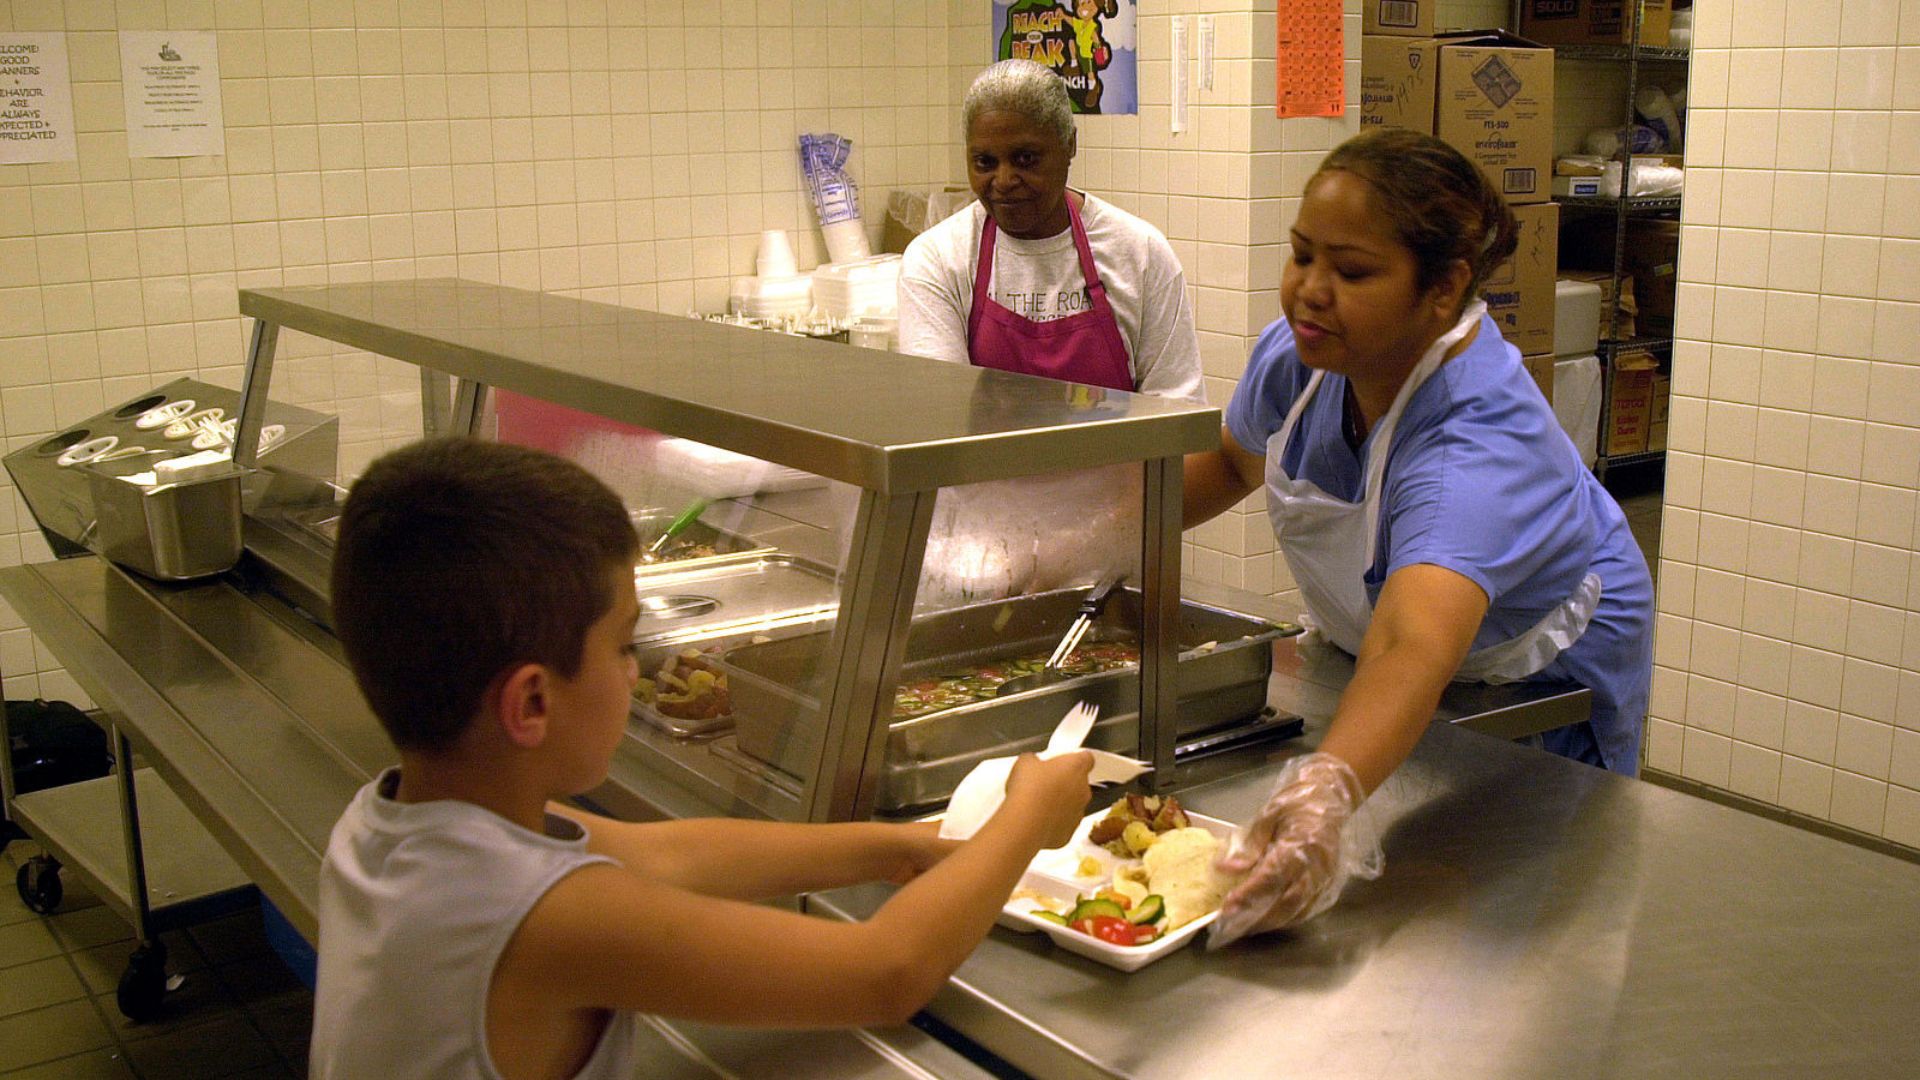 <p><a href="https://fortune.com/2024/04/04/california-20-hour-fast-food-minimum-wage-schools-compete-cafeteria-workers/">Fortune</a> reports that the San Luis Coastal Unified School District responded to a 52% surge in school meal participation by doubling its food service staff.   </p> <p>Now preparing 8,500 meals daily across various schools, the district is prioritizing roles that are more appealing to job seekers, such as "culinary lead" and "central kitchen supervisor," aiming to attract talent with more complex skill sets. </p>